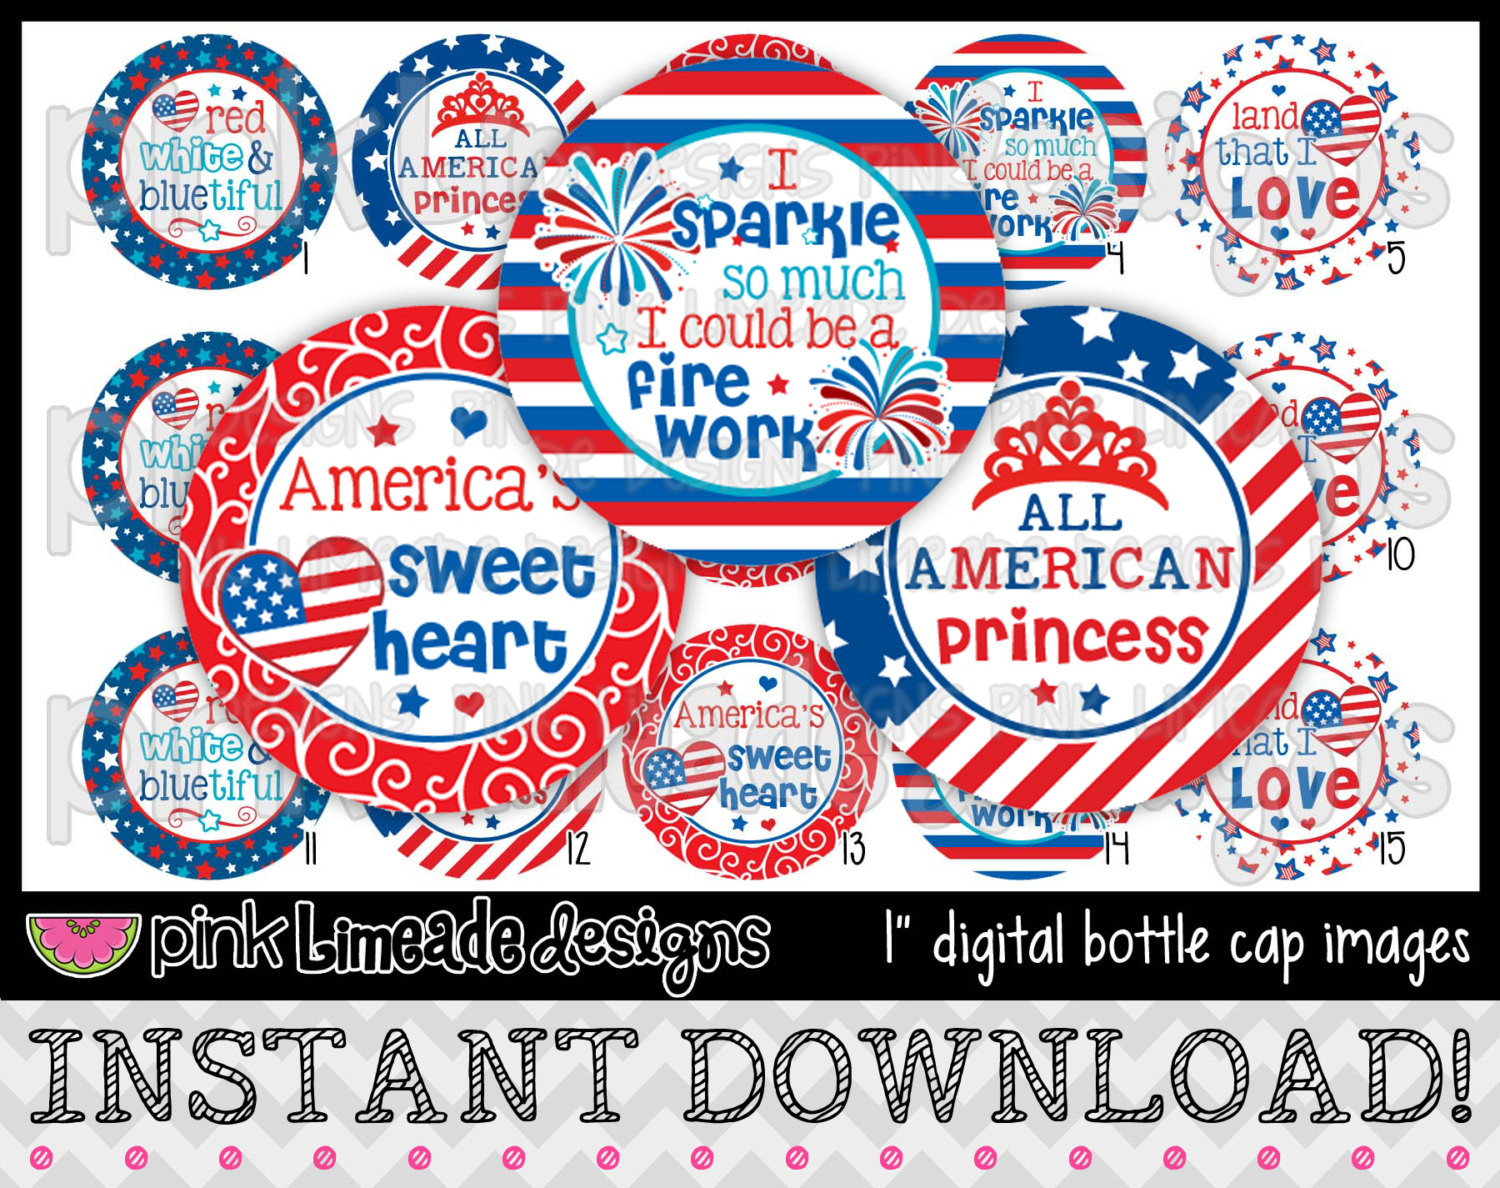 Cute 4th Of July Quotes
 Land That I Love cute 4th of July sayings INSTANT DOWNLOAD